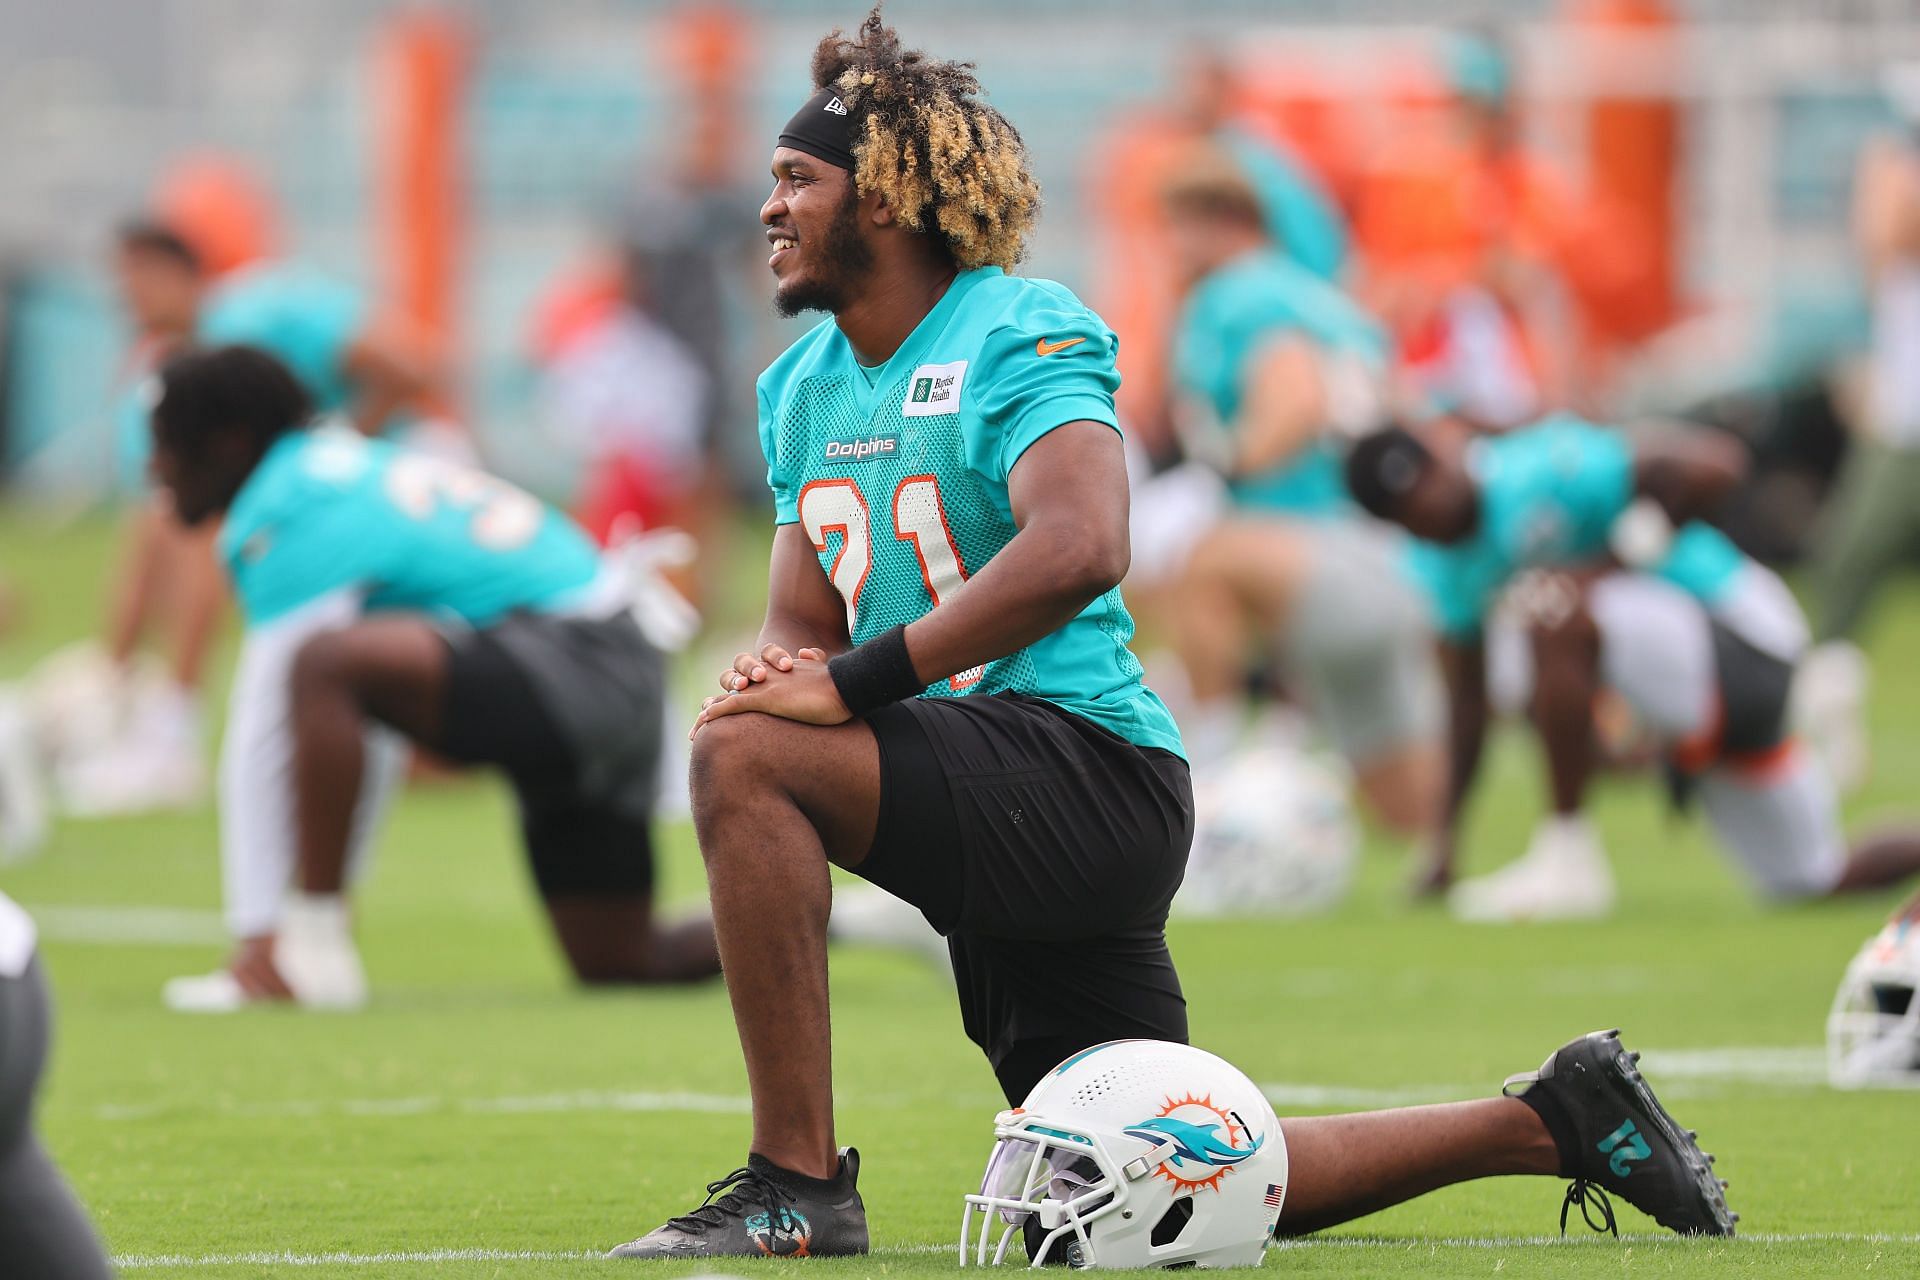 Miami Dolphins stretch in training camp